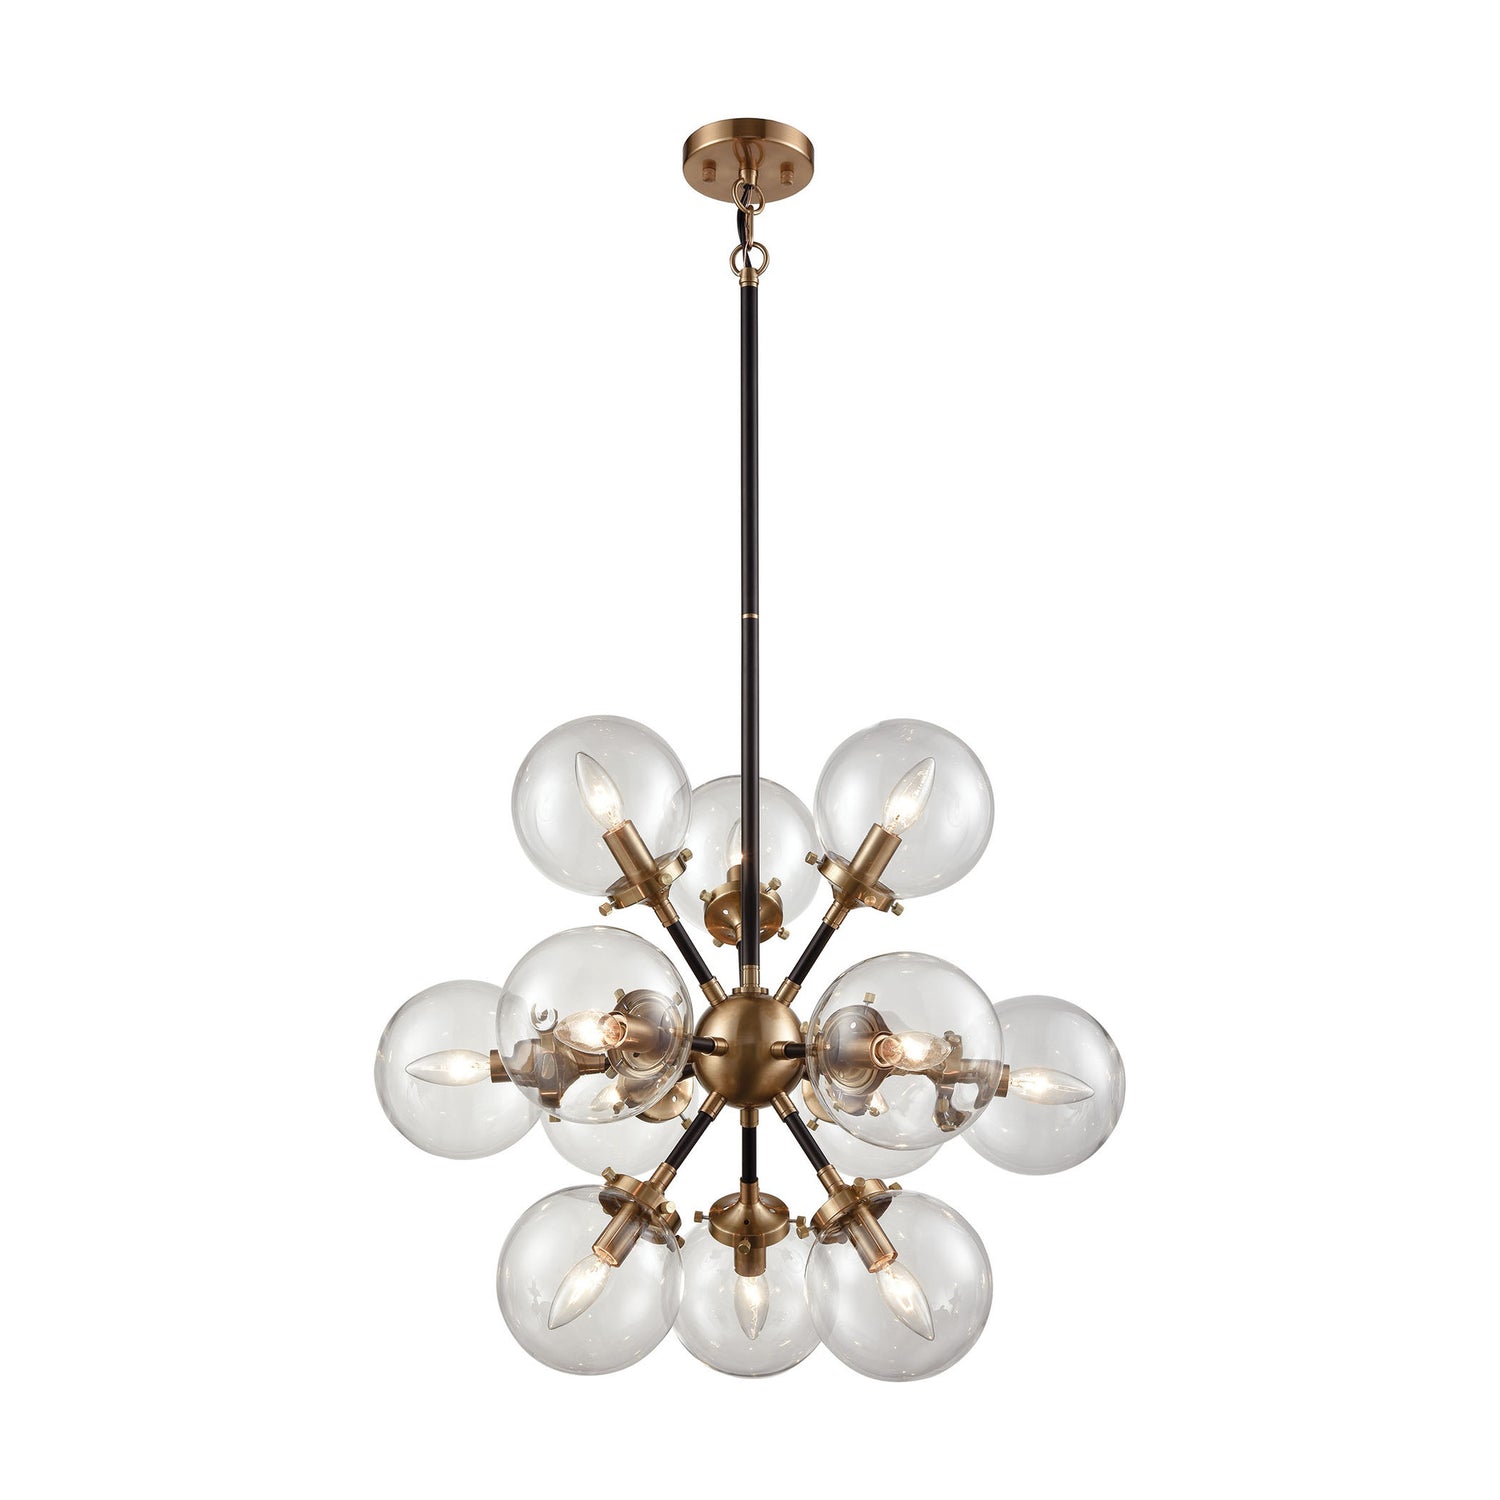 Mid-Century Modern 12 Light Nyx Chandelier in Matte Black and Antique Gold with Clear Glass Globe Shades